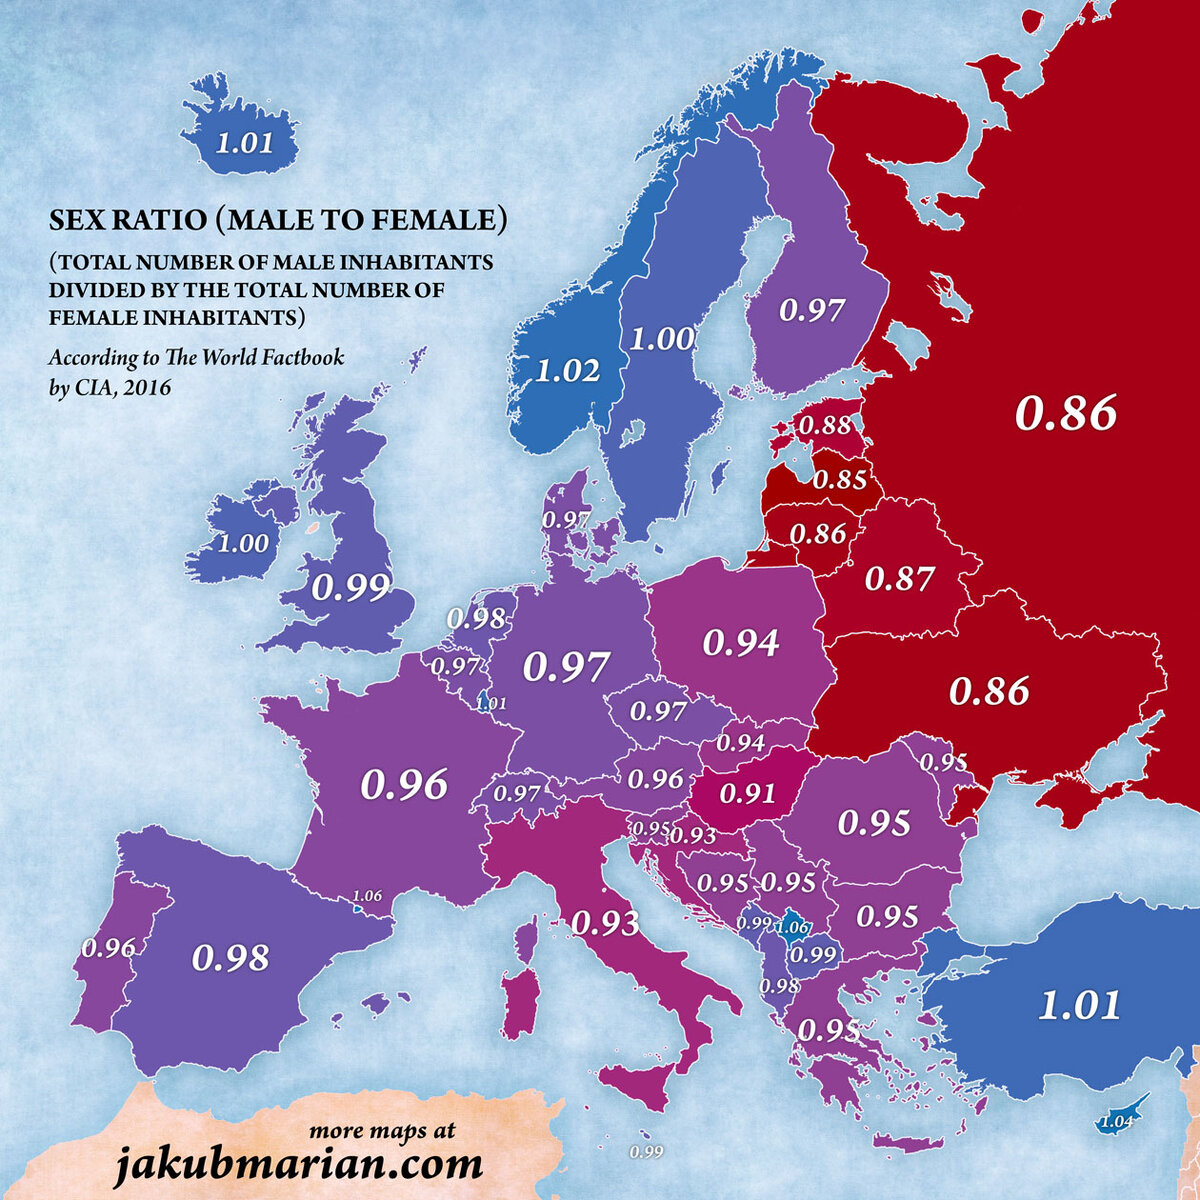 Страна с преобладанием мужского. Number of working migrants in Norway per year. Percent of workpower by illegal immigrants in Russia. Rich Countries want to leave the eu. Inhabit in the World.